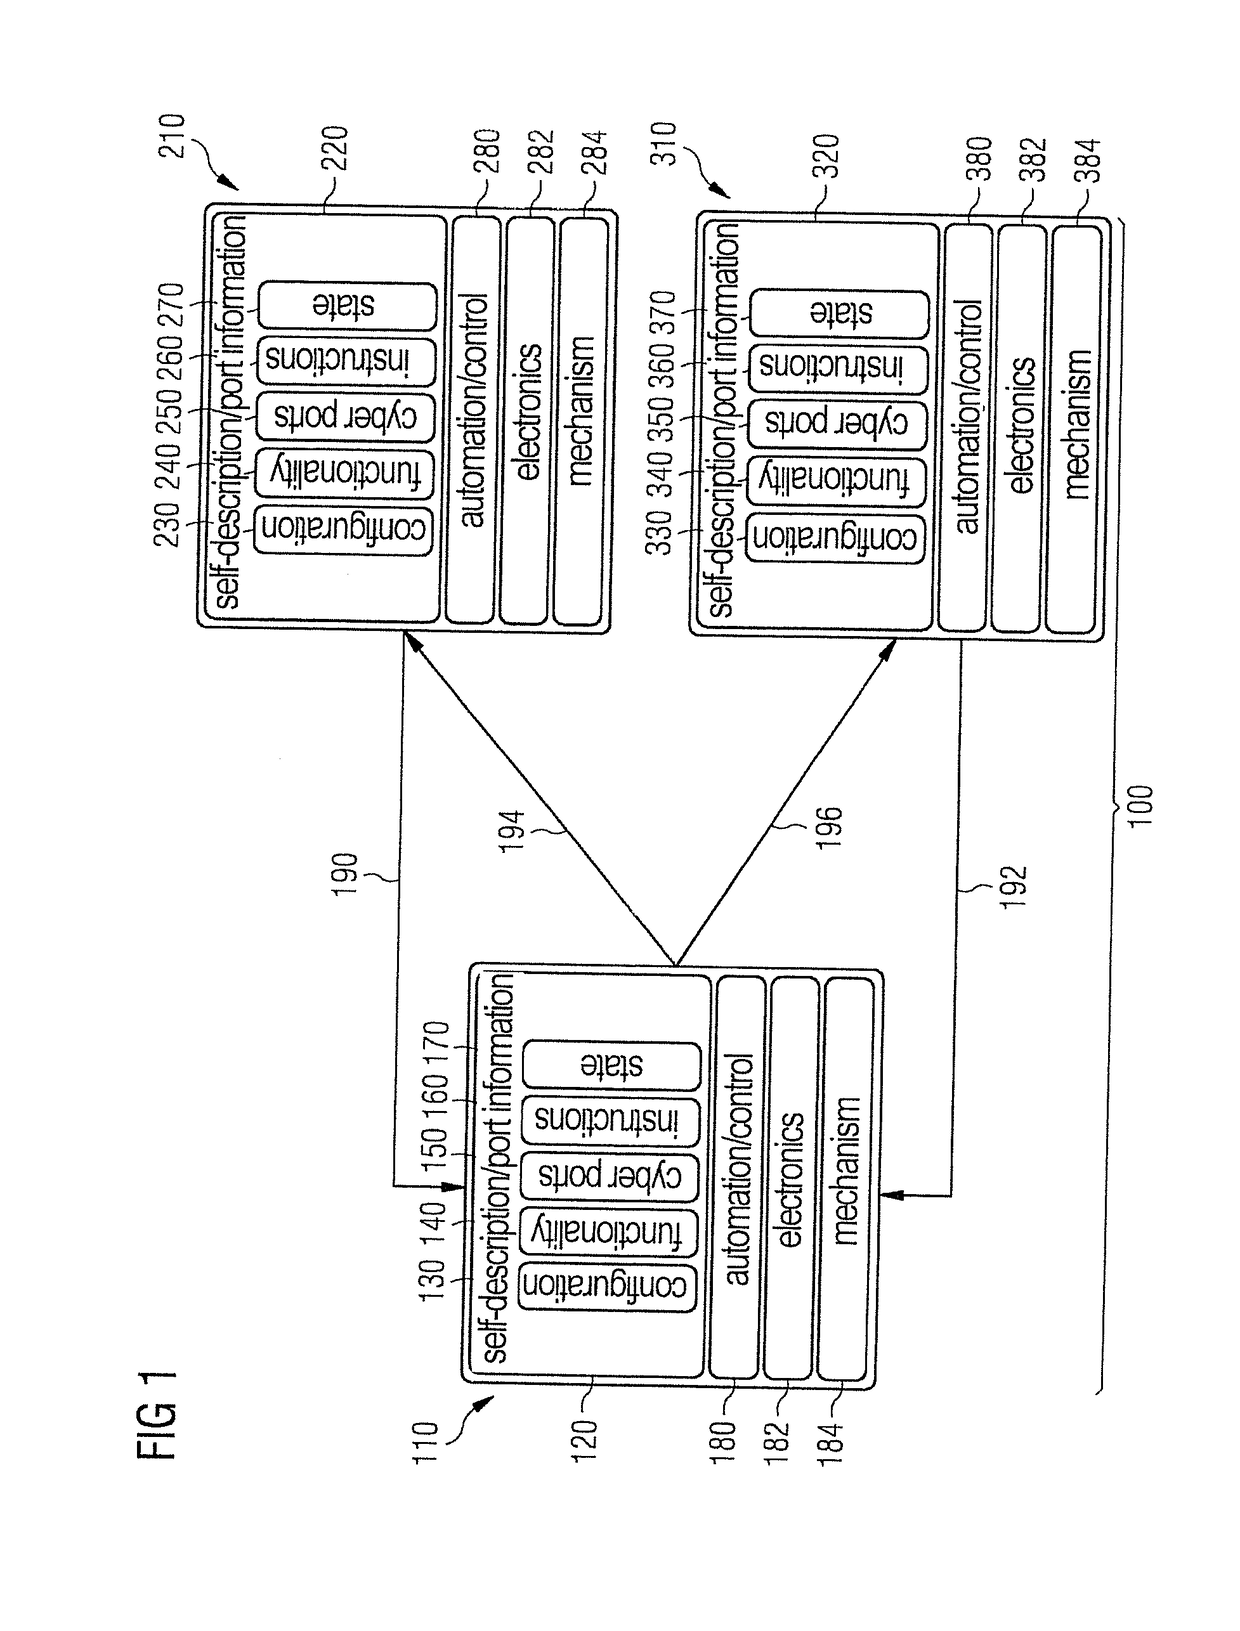 Production Module for Performing a Production Function on a Product